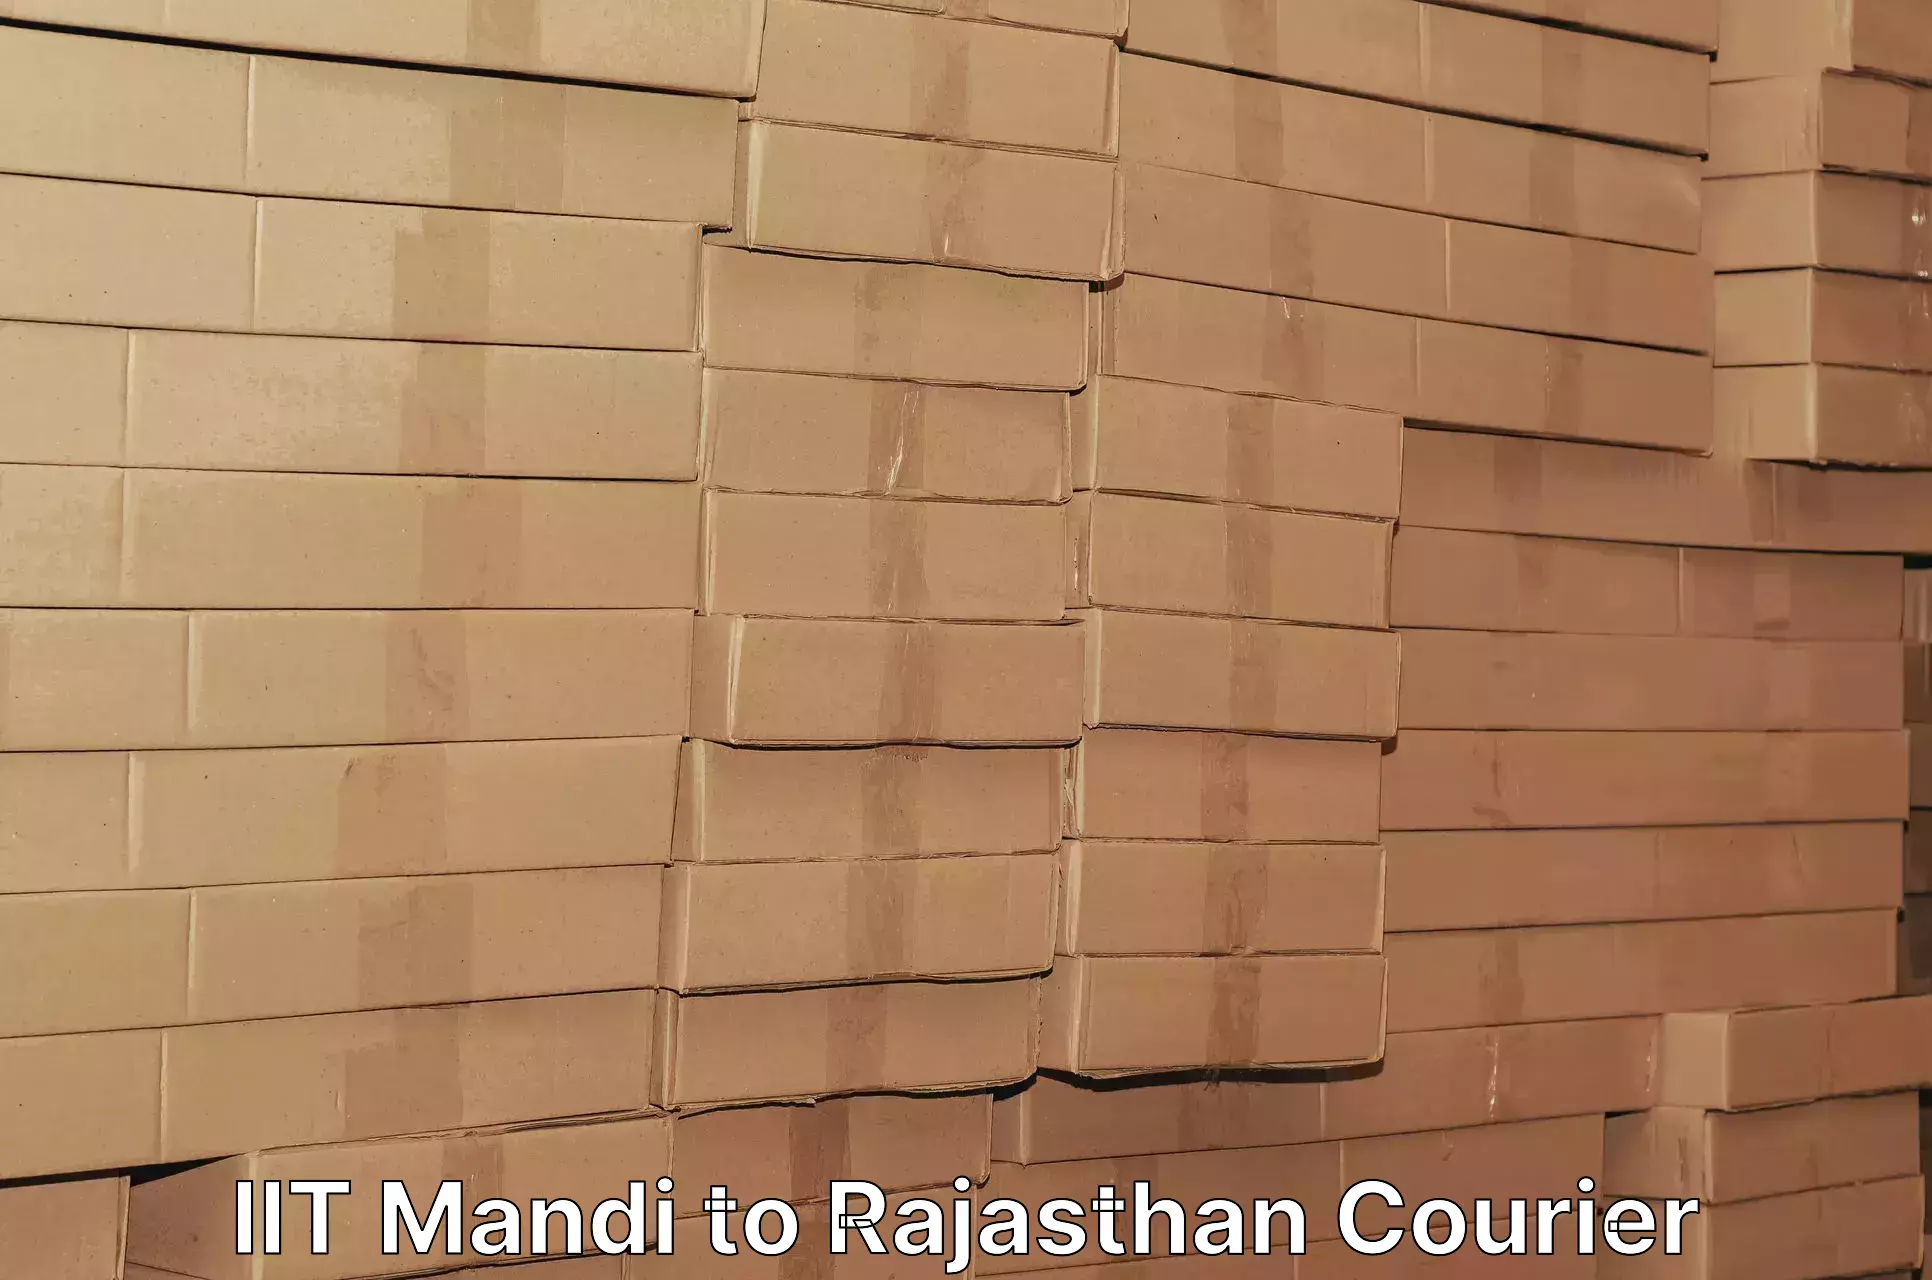 Reliable courier service IIT Mandi to Rajgarh Rajasthan